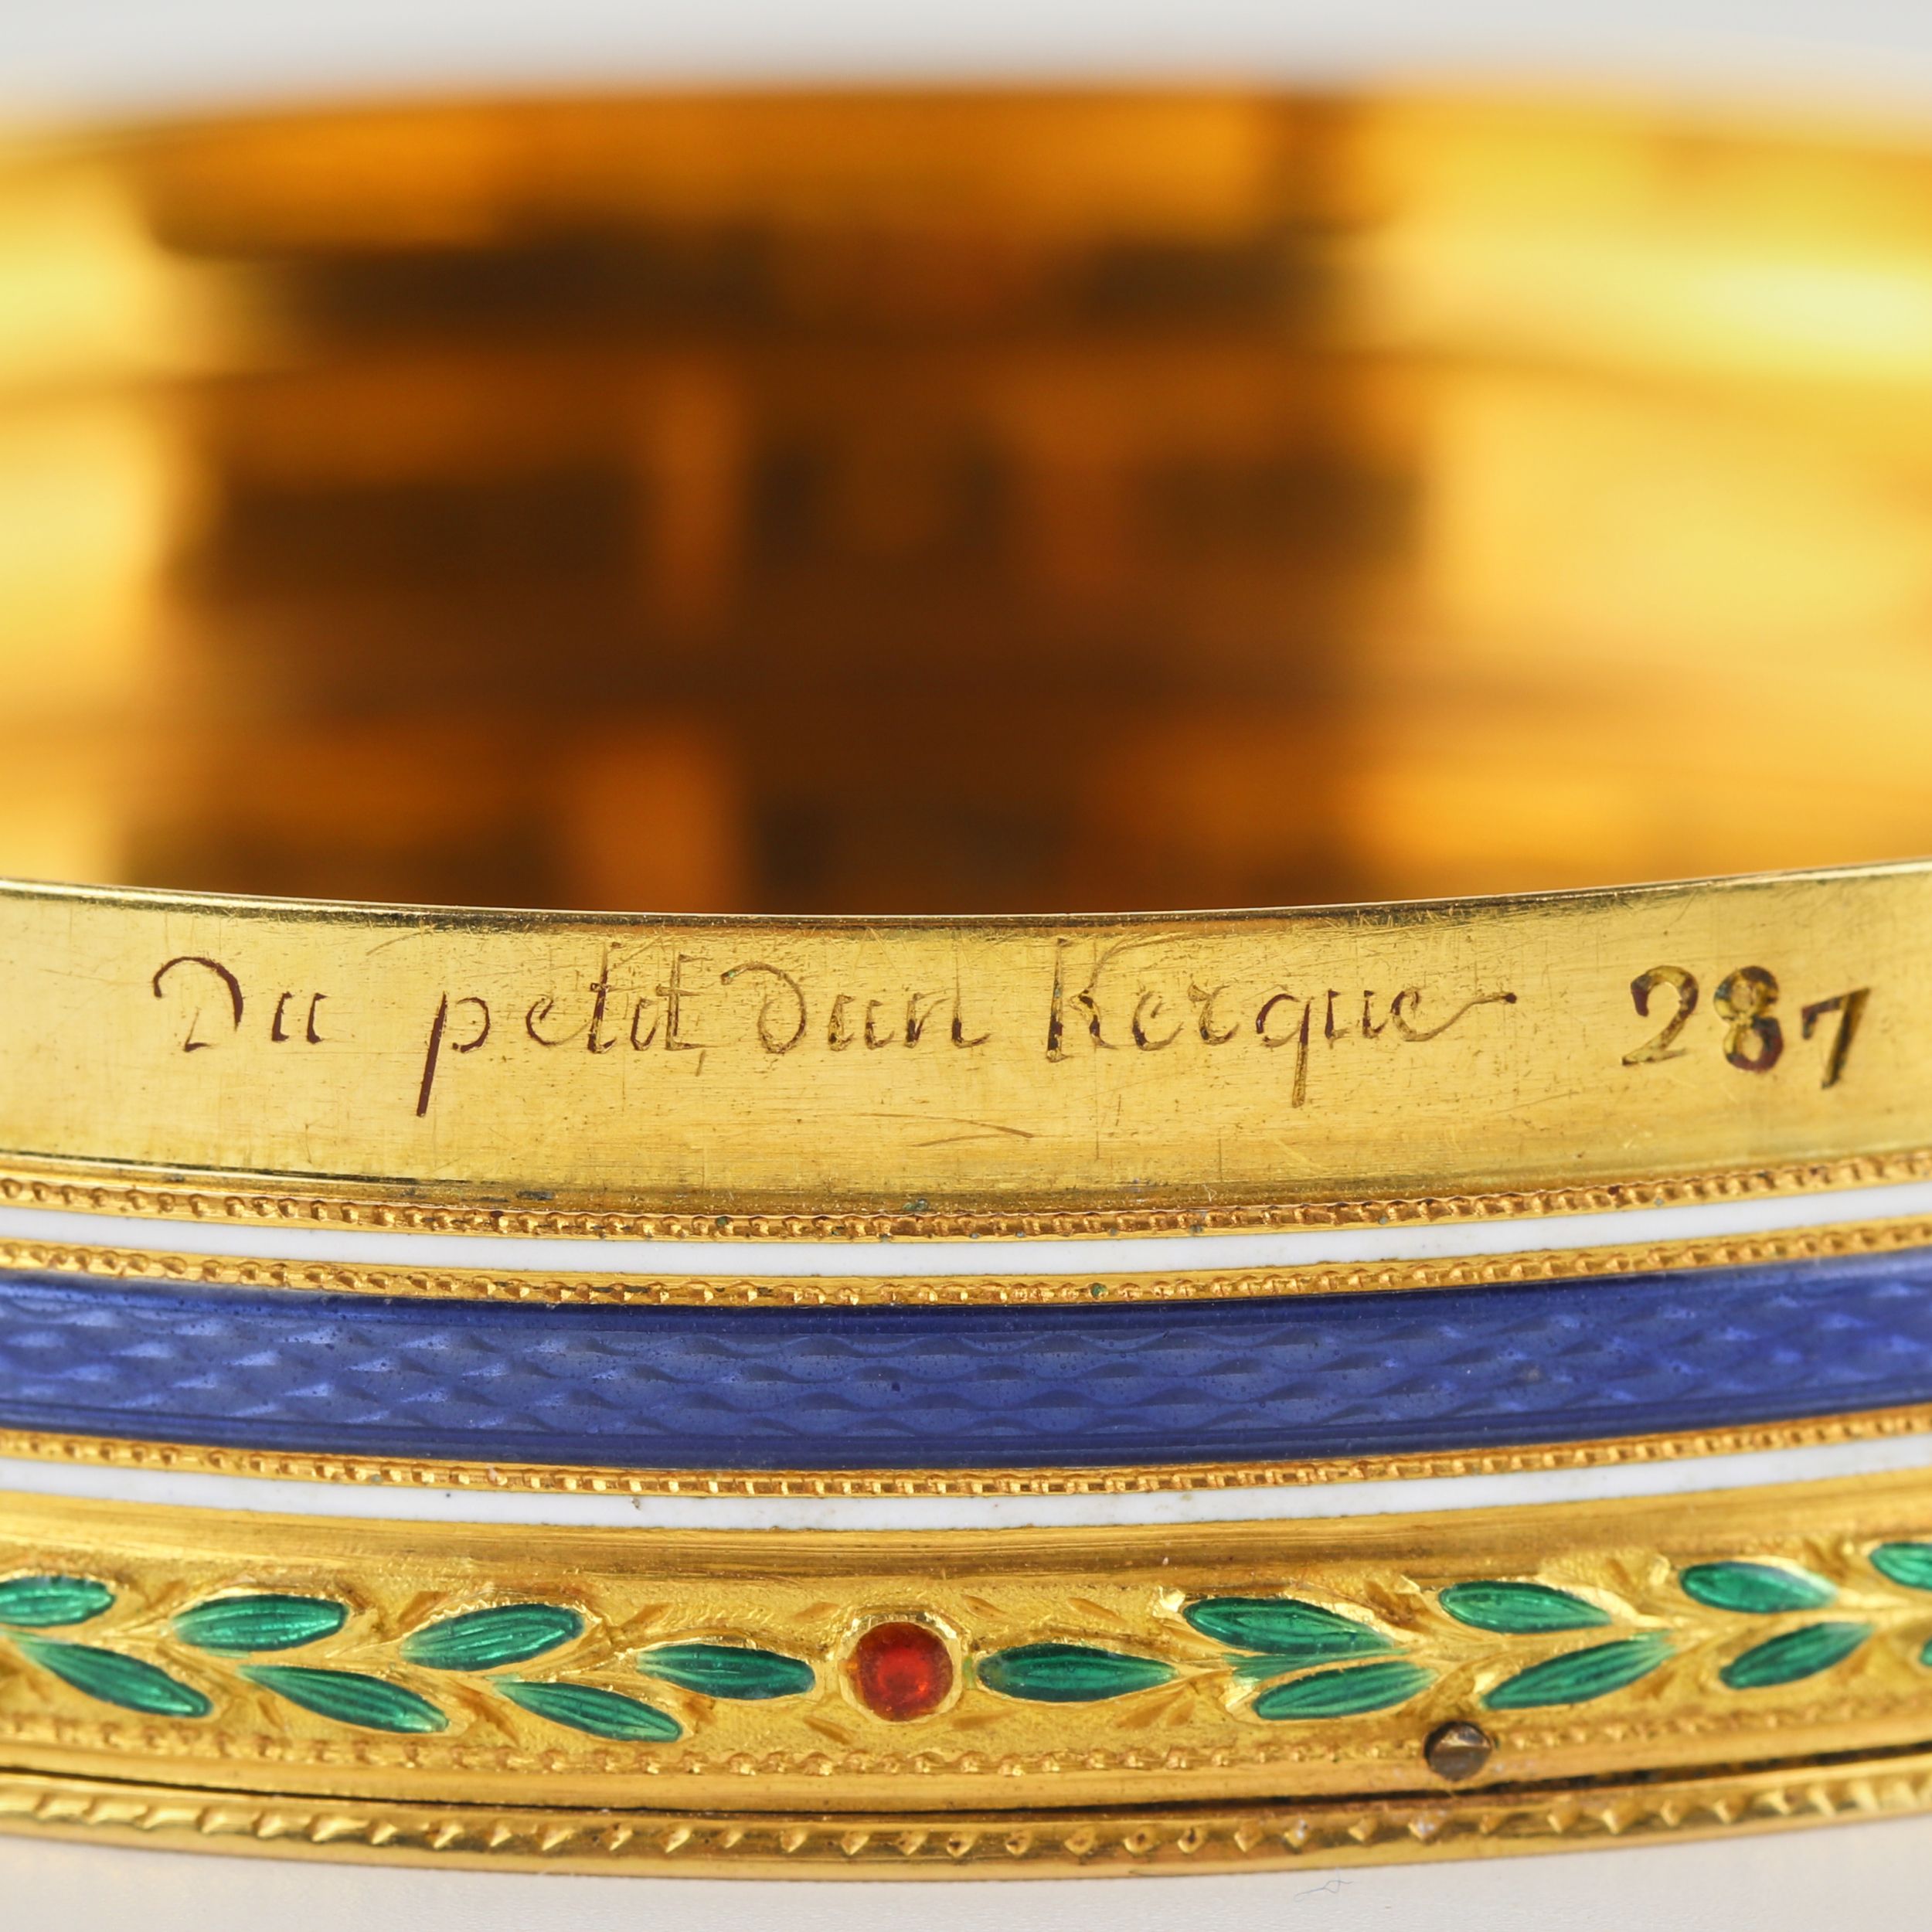 French gilded snuffbox of the late 18th century, with enamel decoration and painting. - Image 8 of 10